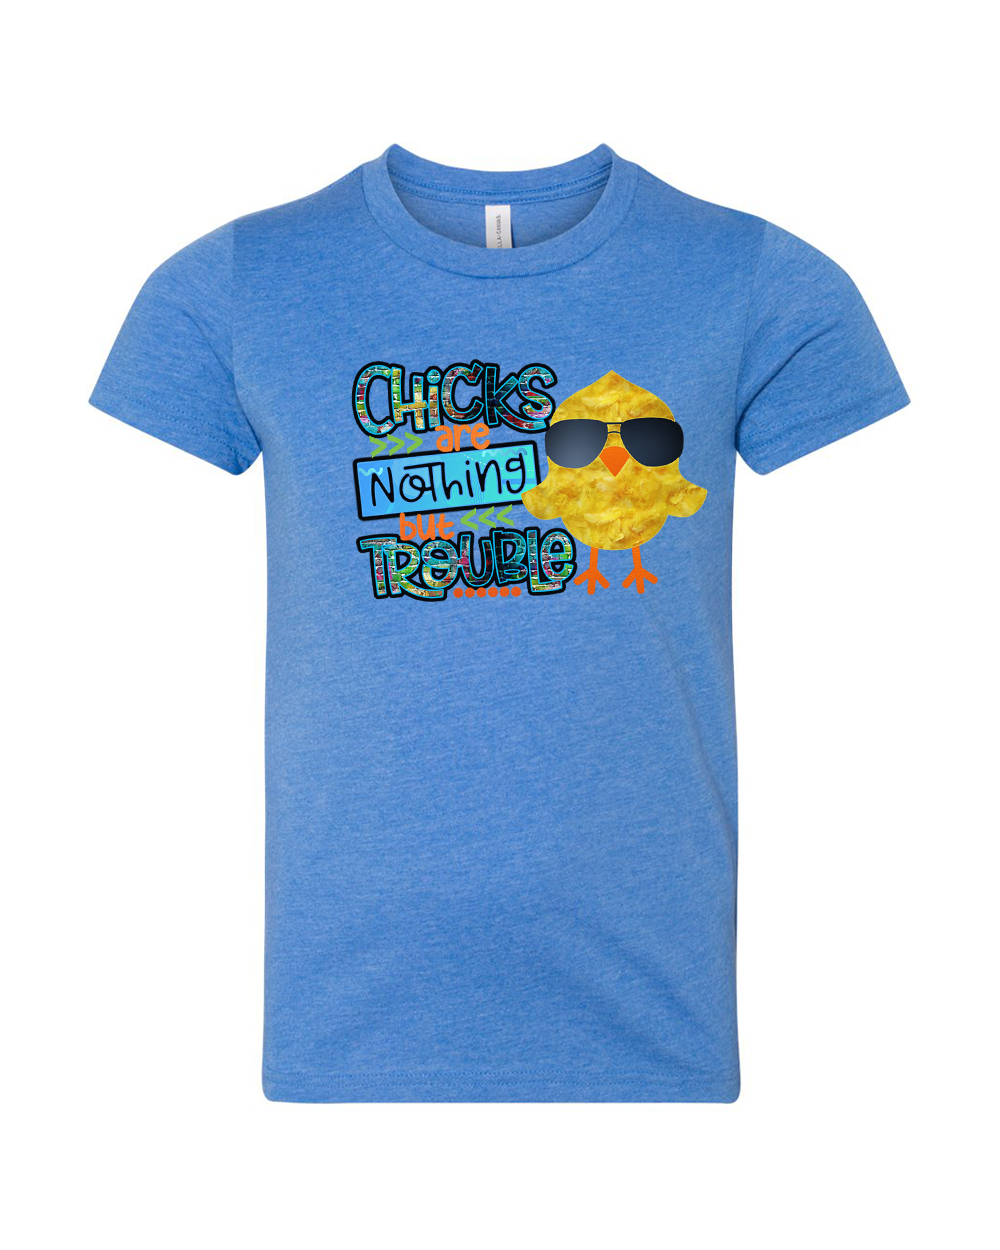 Chicks Are Nothing But Trouble Shirt Boy Easter Day Tee